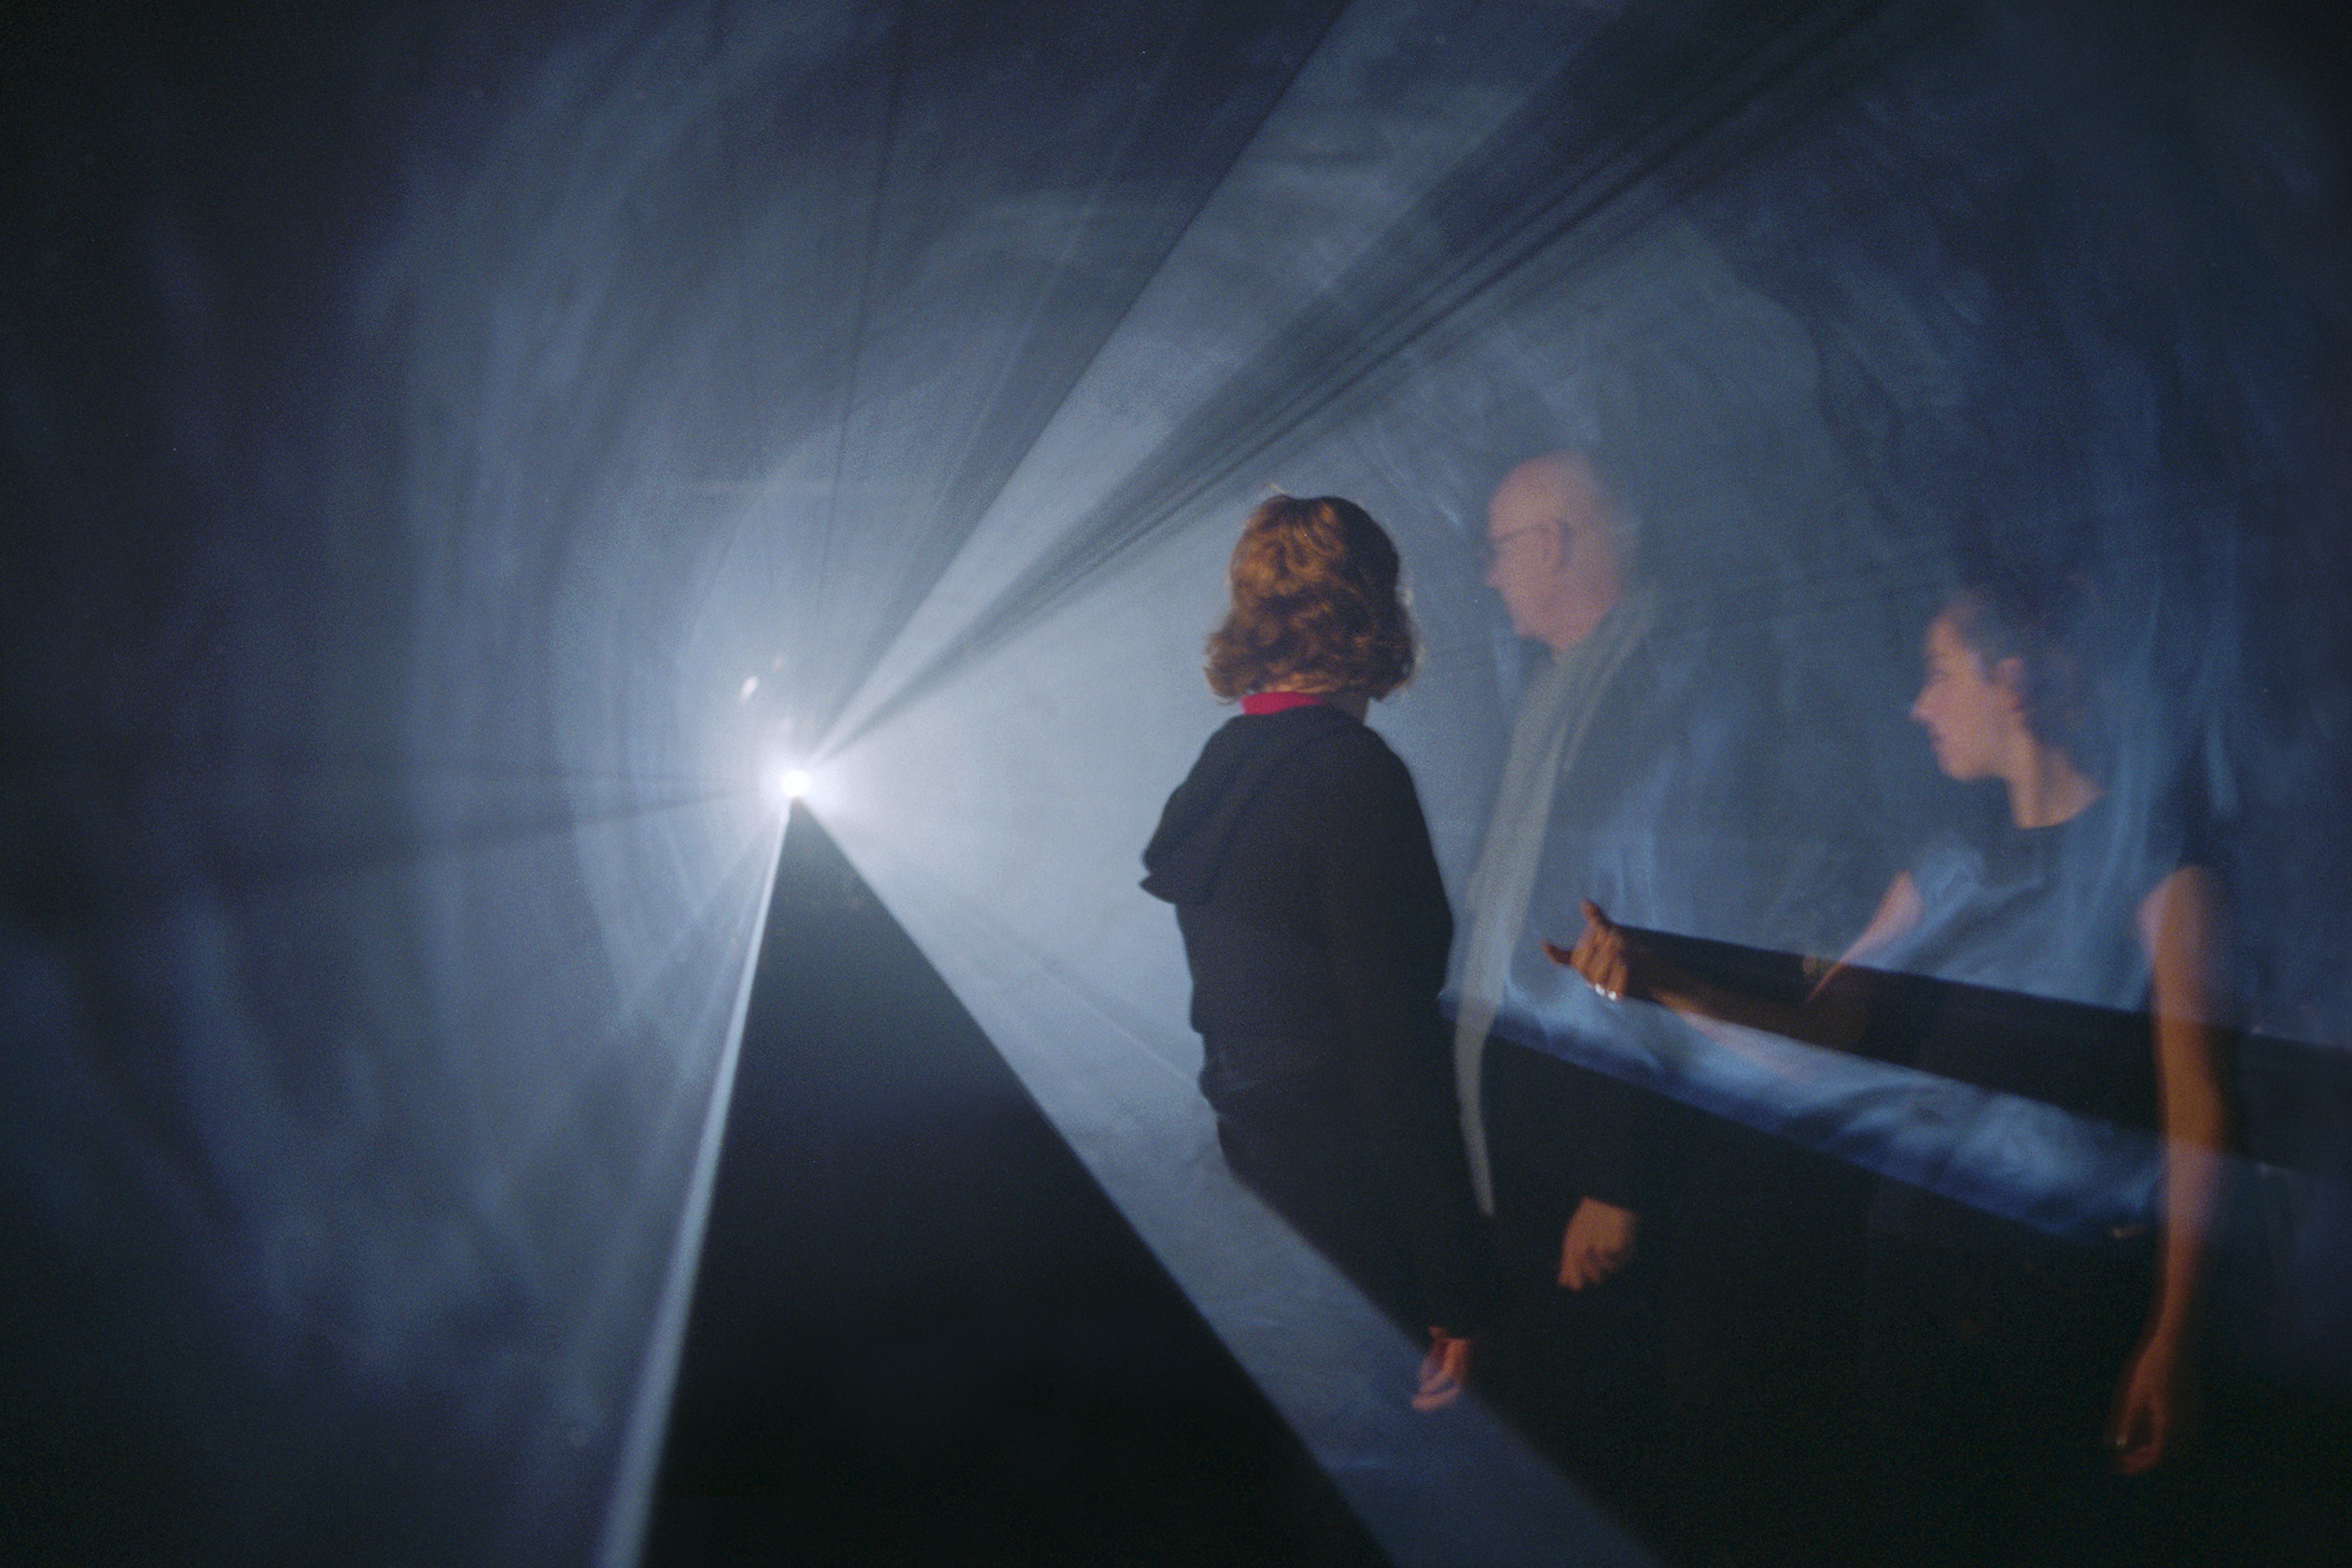 Anthony McCall: Line Describing a Cone (1973), at the twenty-fourth minute. Installation view, Into the Light: The Projected Image in American Art 1964-1977, Whitney Museum of American Art, 2001. Photograph by Hank Graber. | Anthony McCall | Sunday 2 April – Sunday 15 October 2017 | Lismore Castle Arts